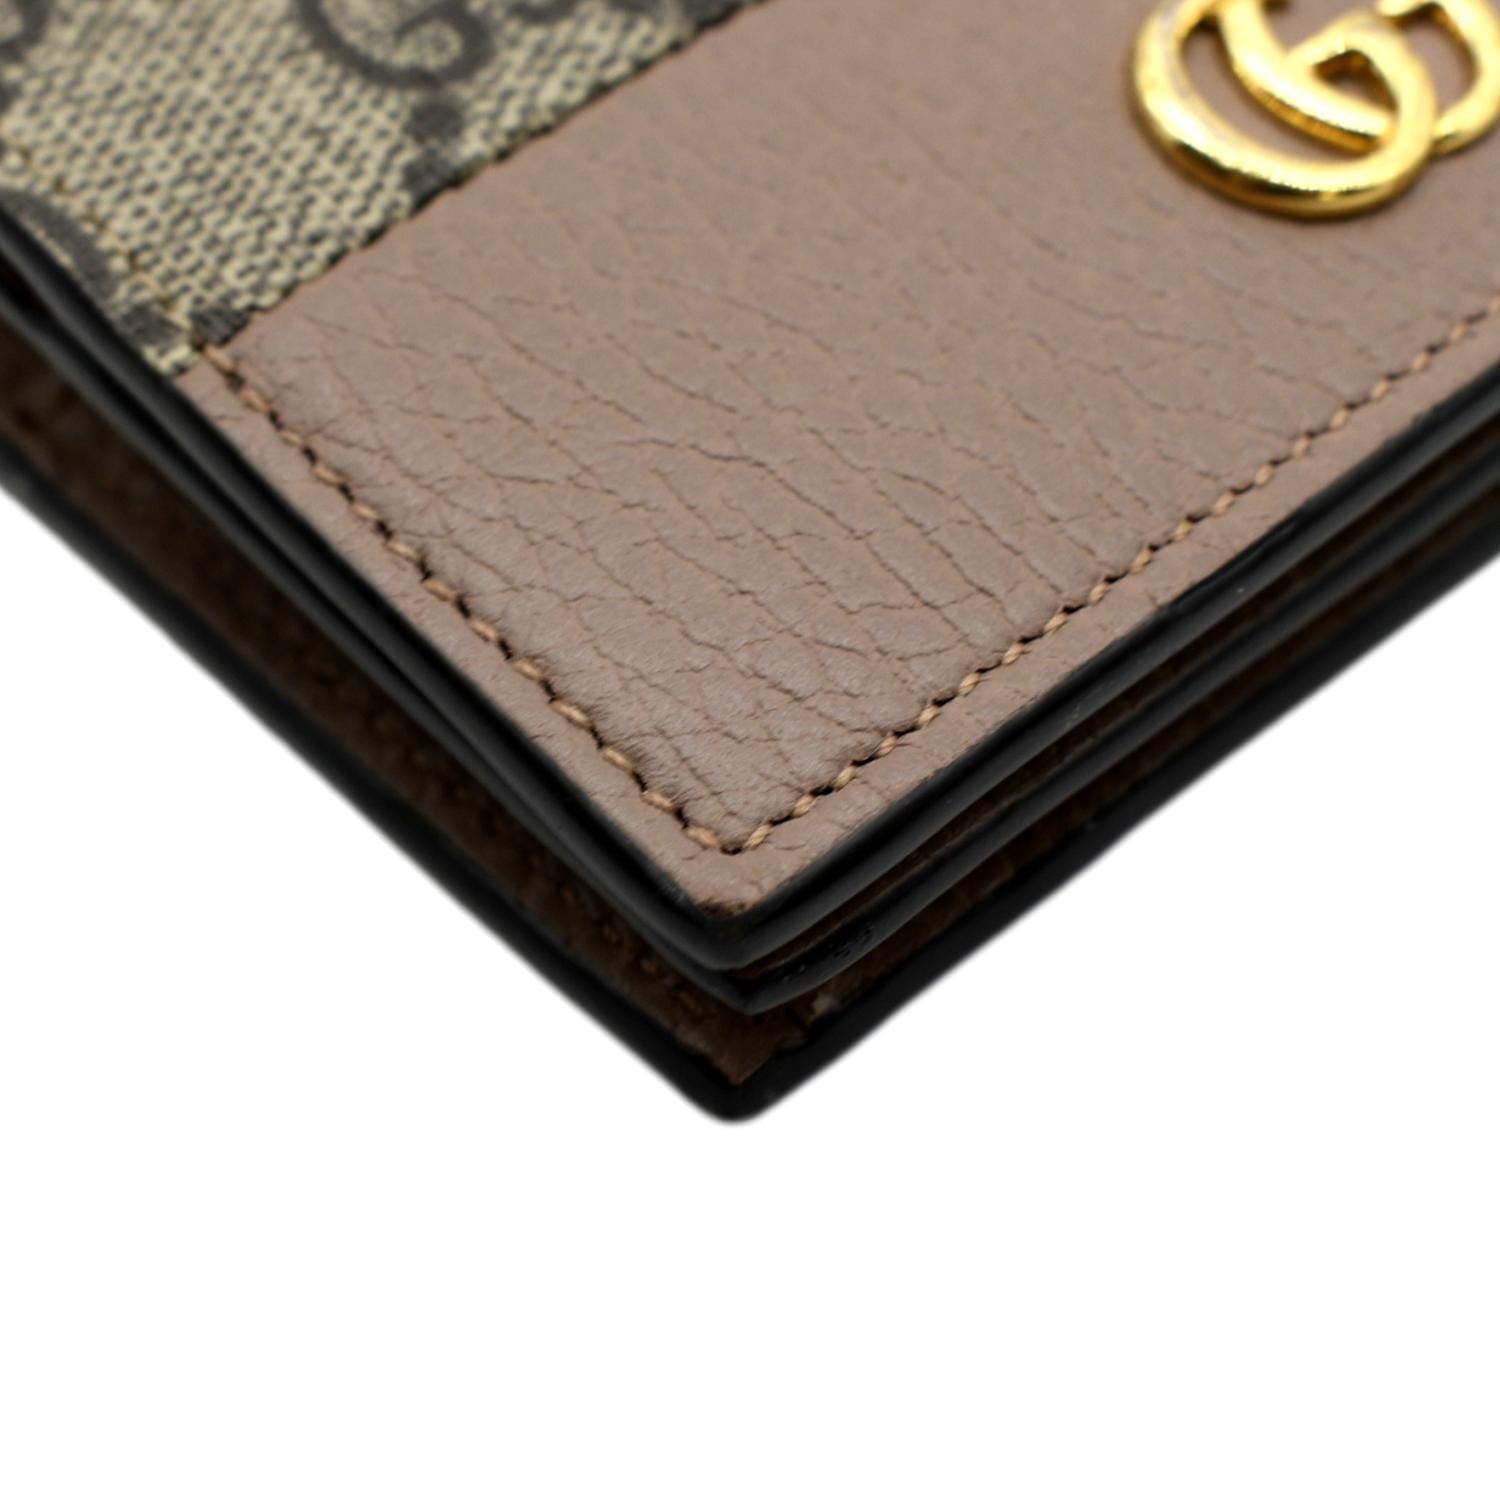 Gucci GG Leather Card Case Wallet